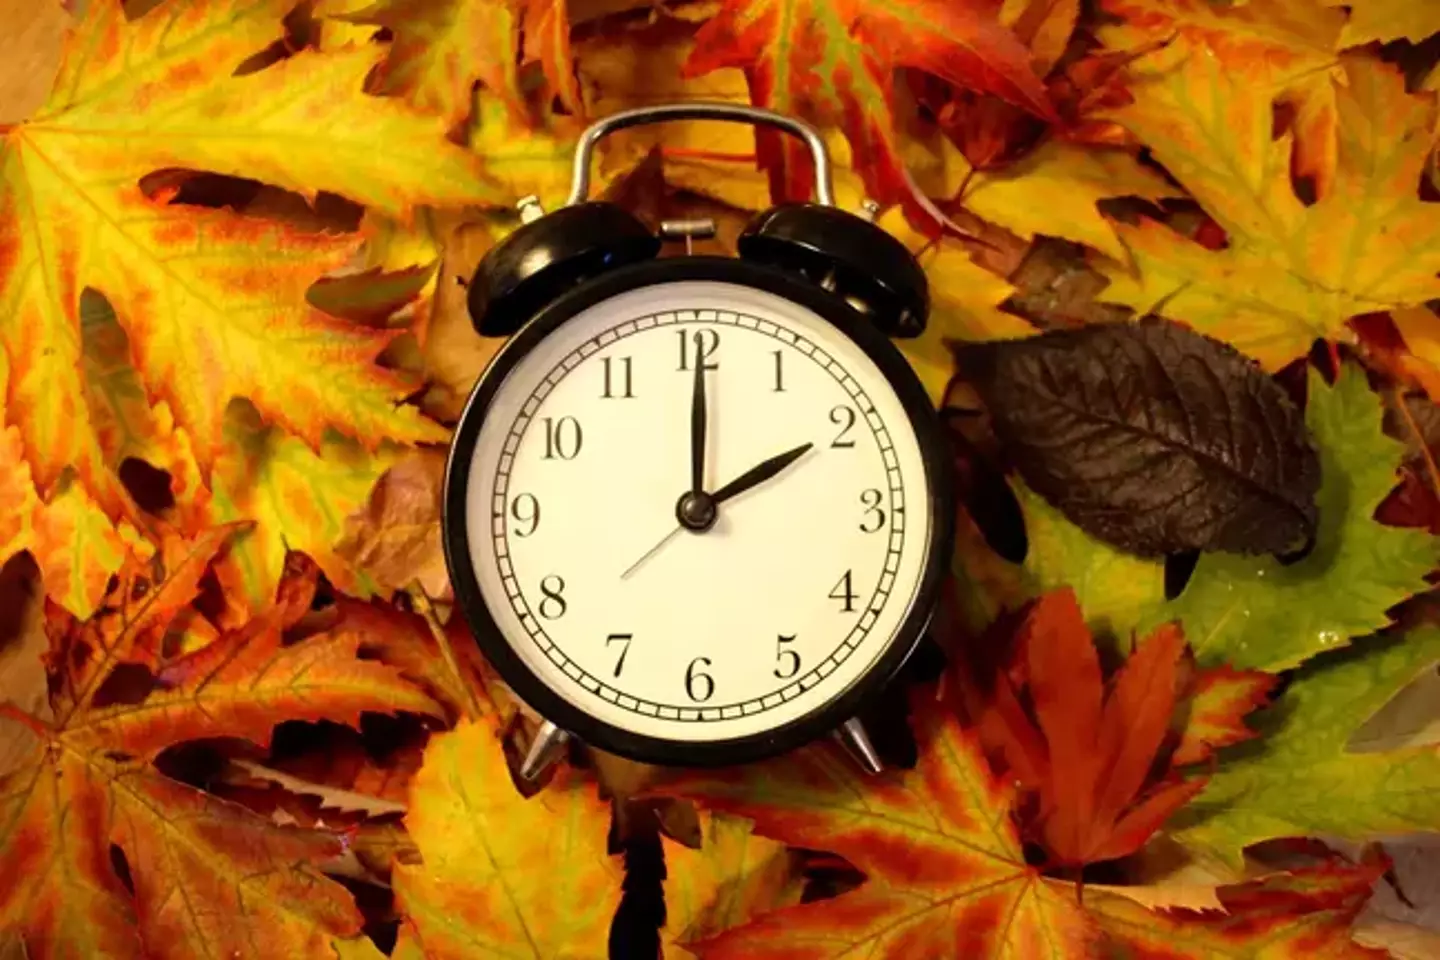 Some experts have suggested that the clocks changing each year negatively impacts our health.